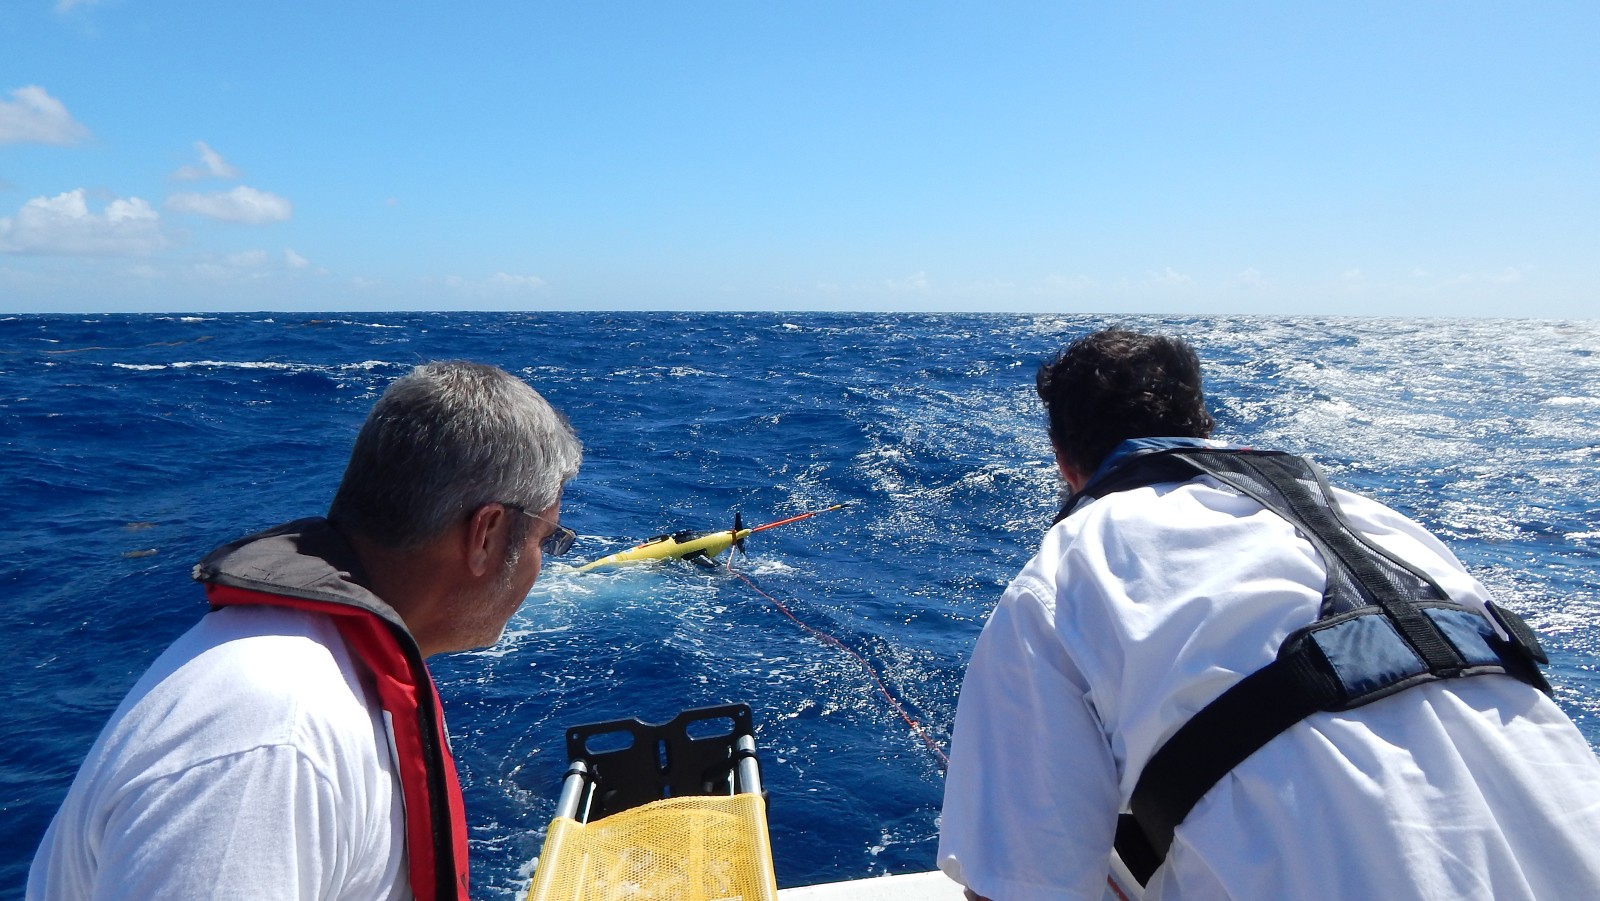 Professor Julio Morell of The University of Puerto Rico at Mayaguez and AOML's Grant Rawson, watch the glider drift away after deploying it on February 6, 2015. Image credit: NOAA